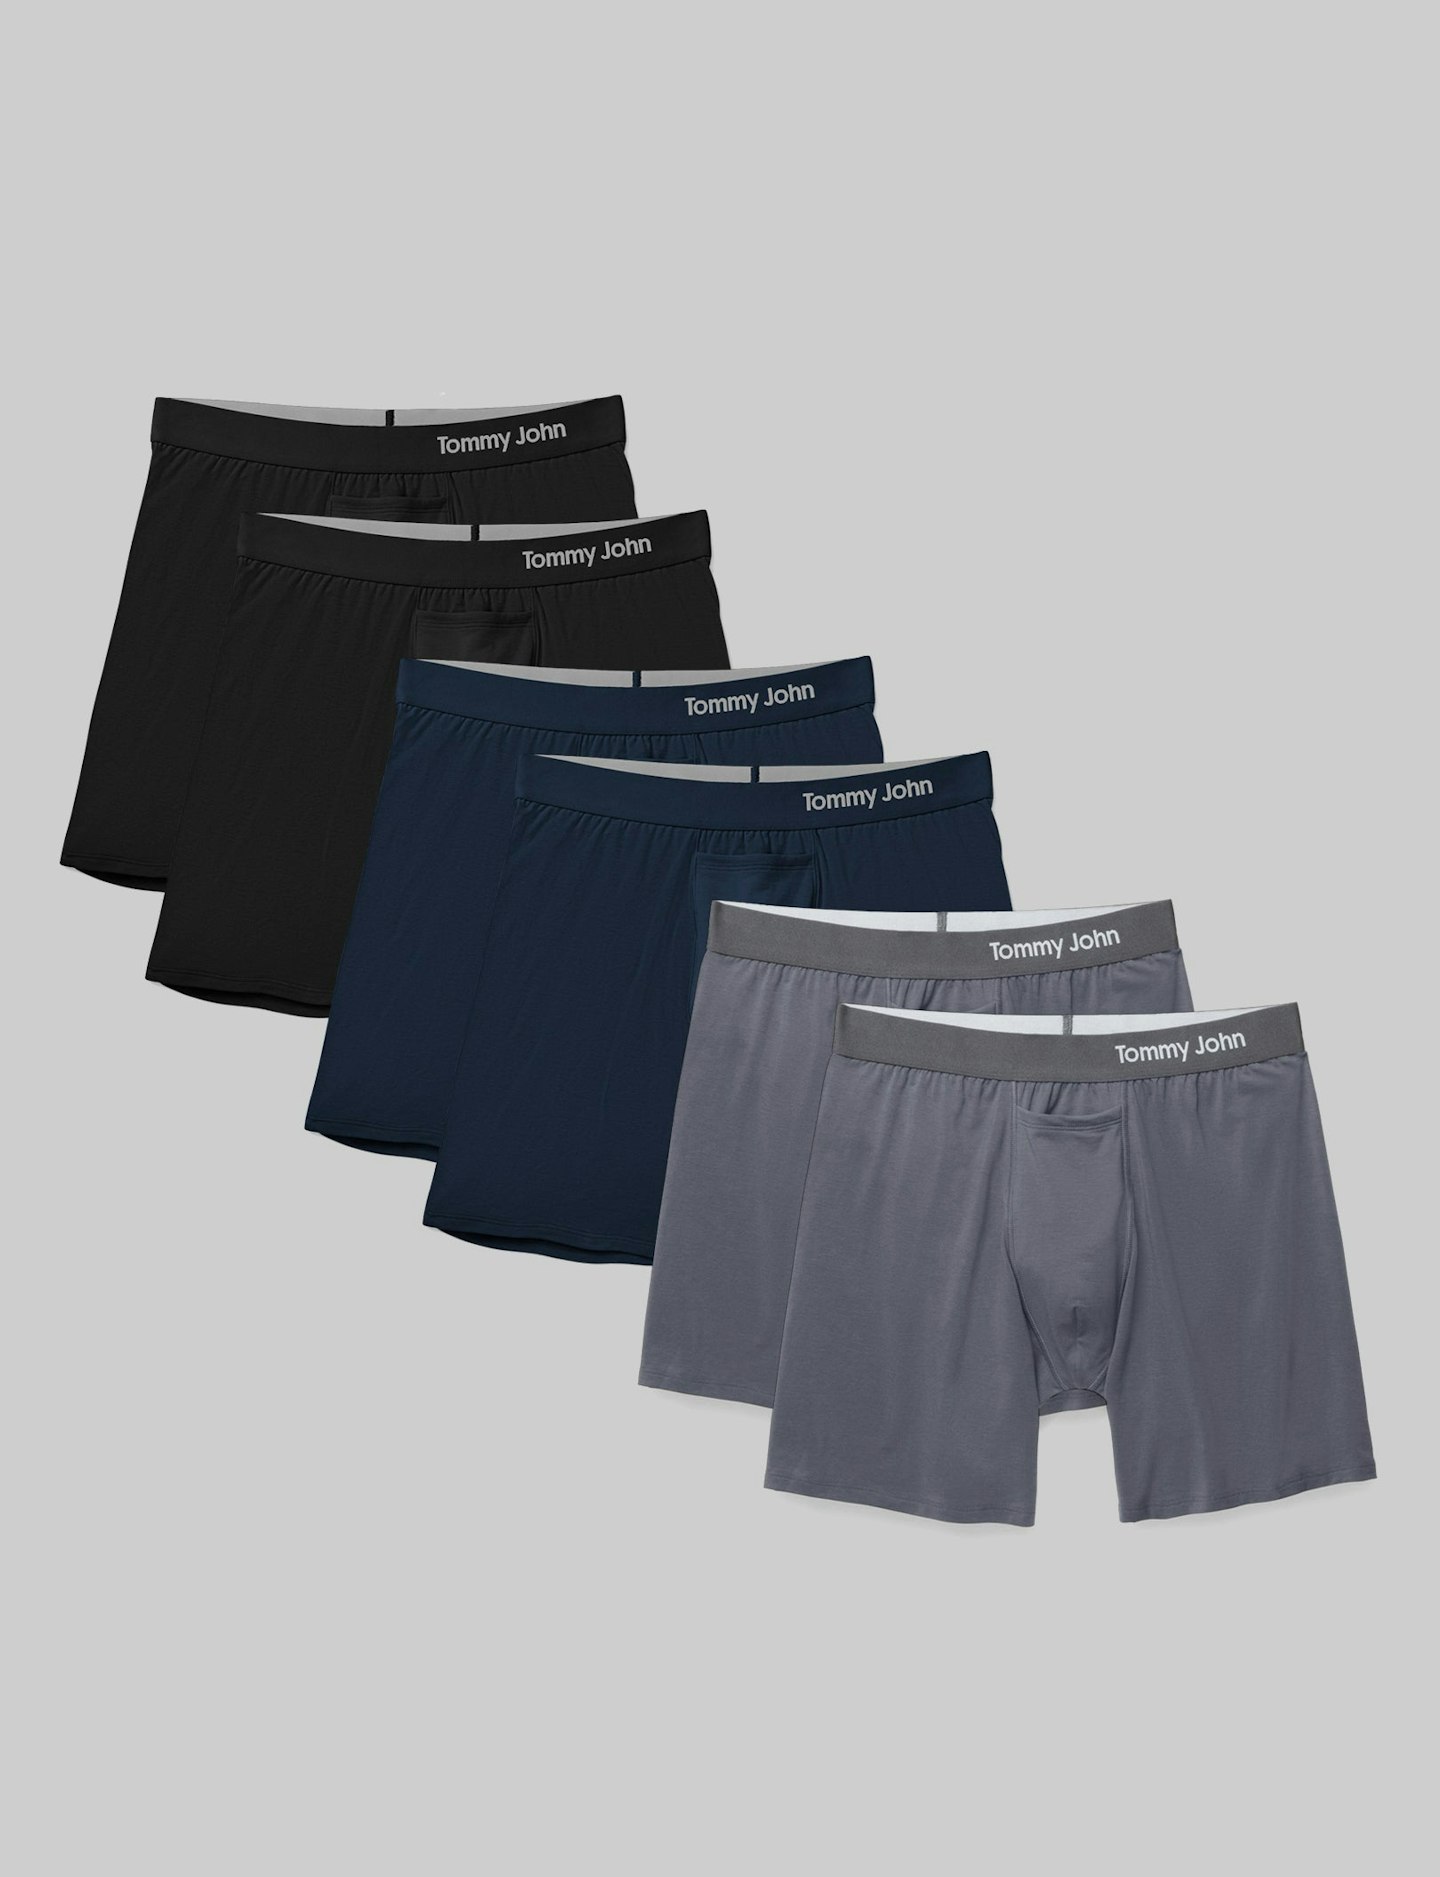 Cool Cotton Relaxed Fit Boxer 6 (6-Pack) – Tommy John